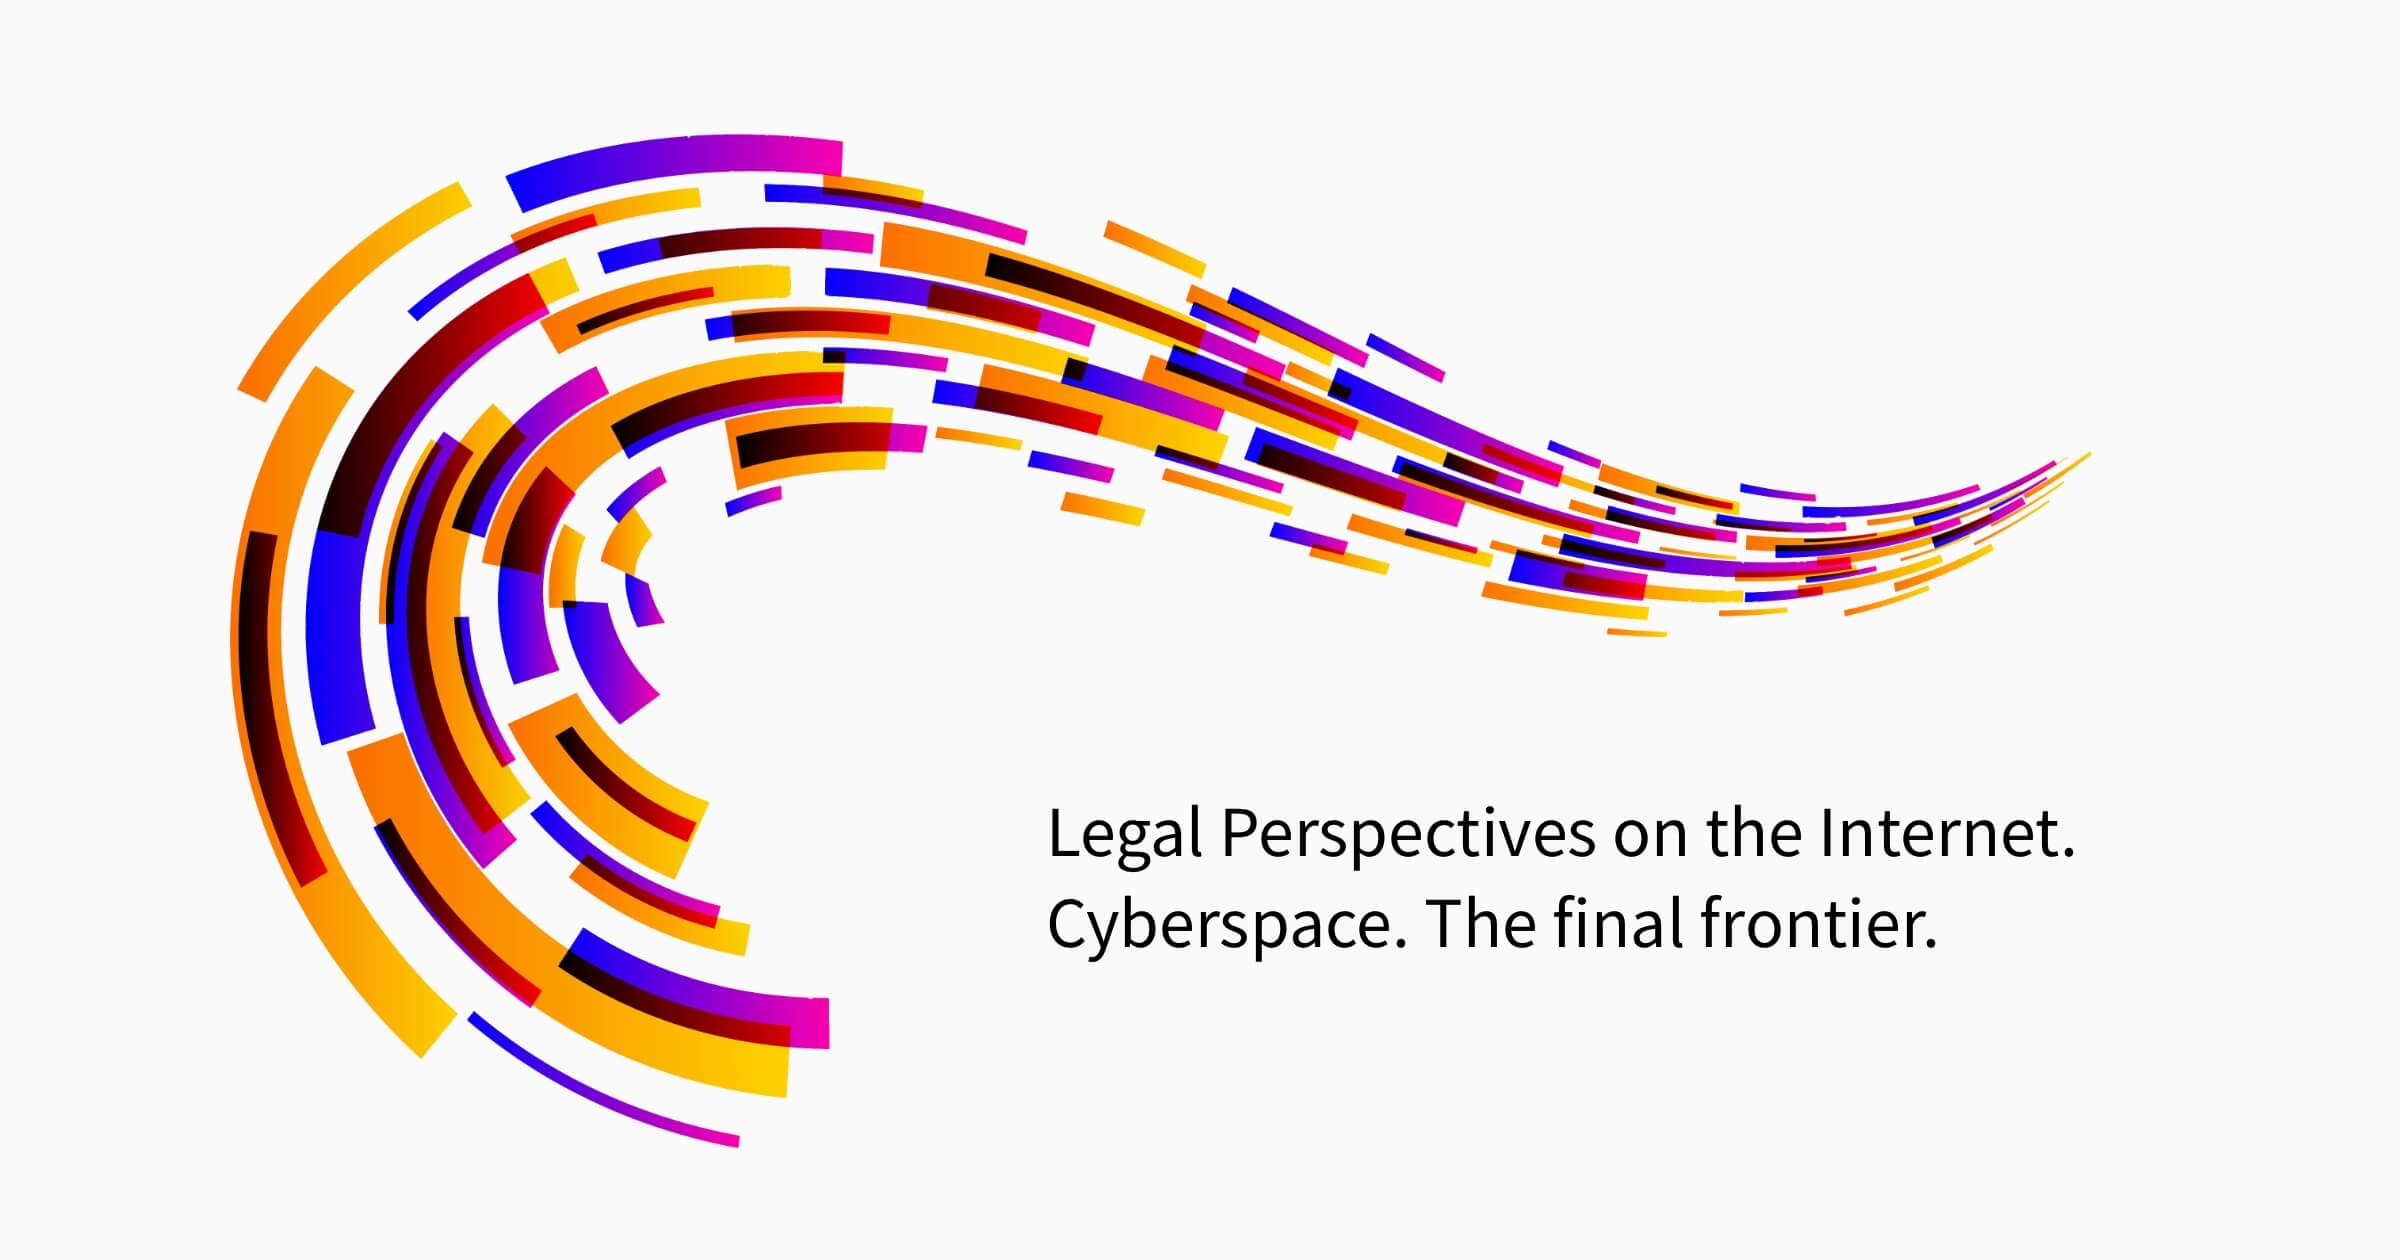 Legal Perspectives on the Internet. Cyberspace. The final frontier